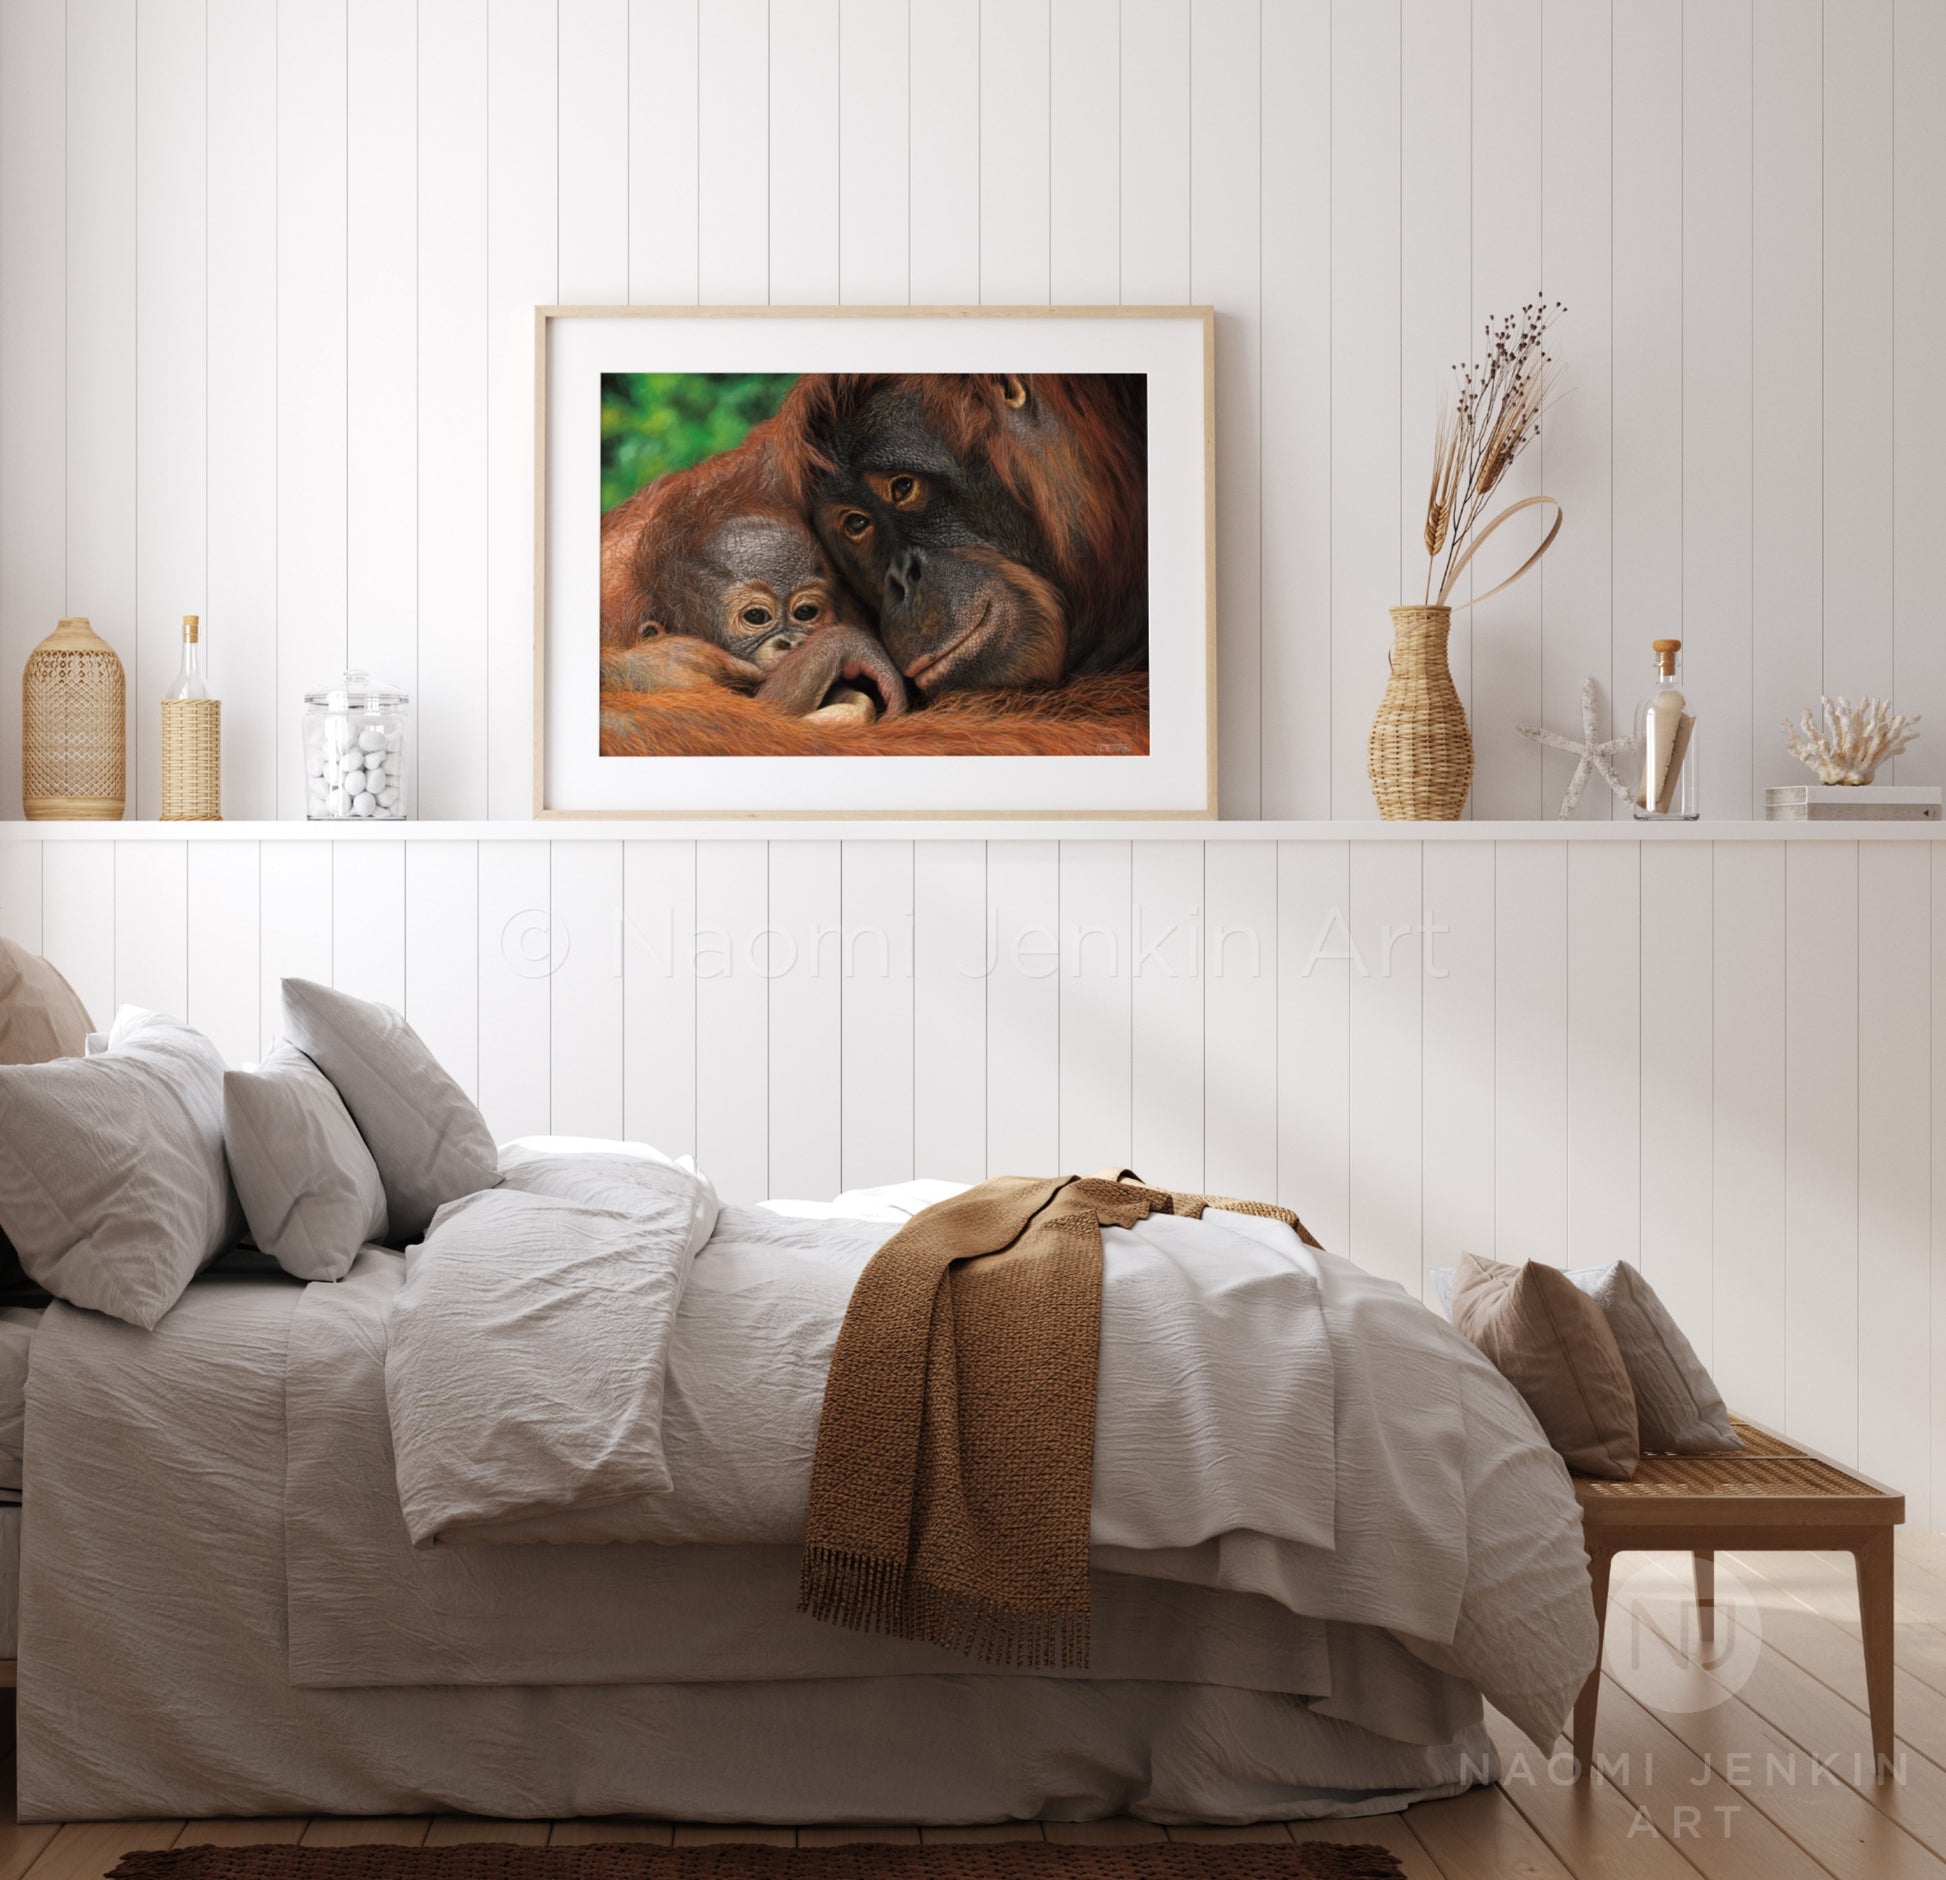 Framed orangutan mother and baby print by wildlife artist of the year 2022 finalist Naomi Jenkin.